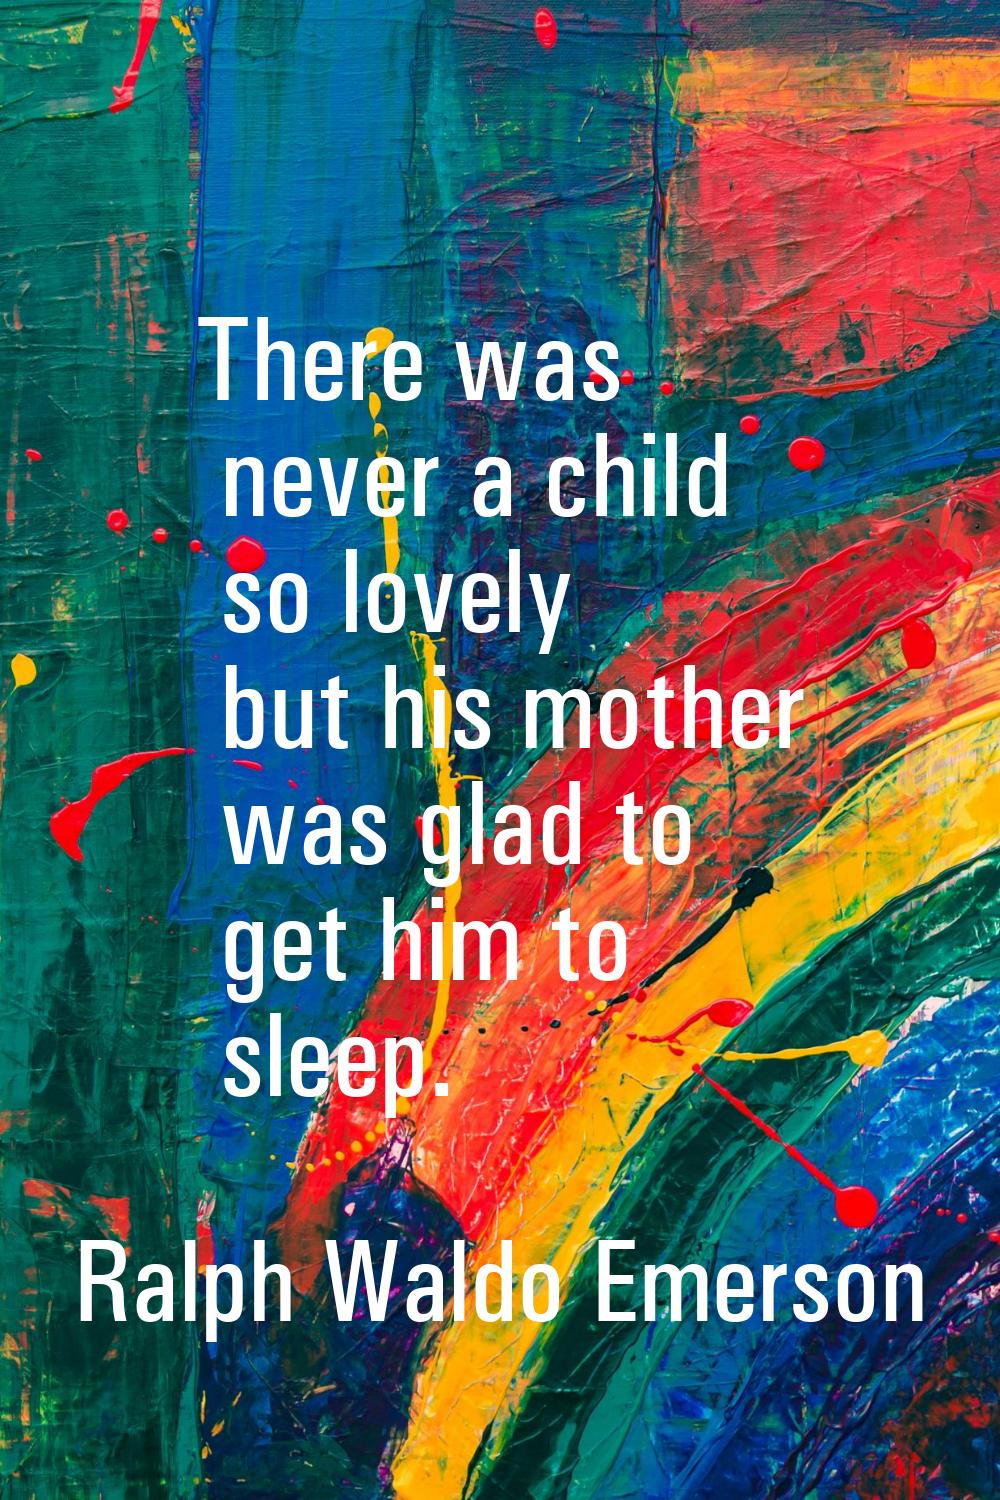 There was never a child so lovely but his mother was glad to get him to sleep.